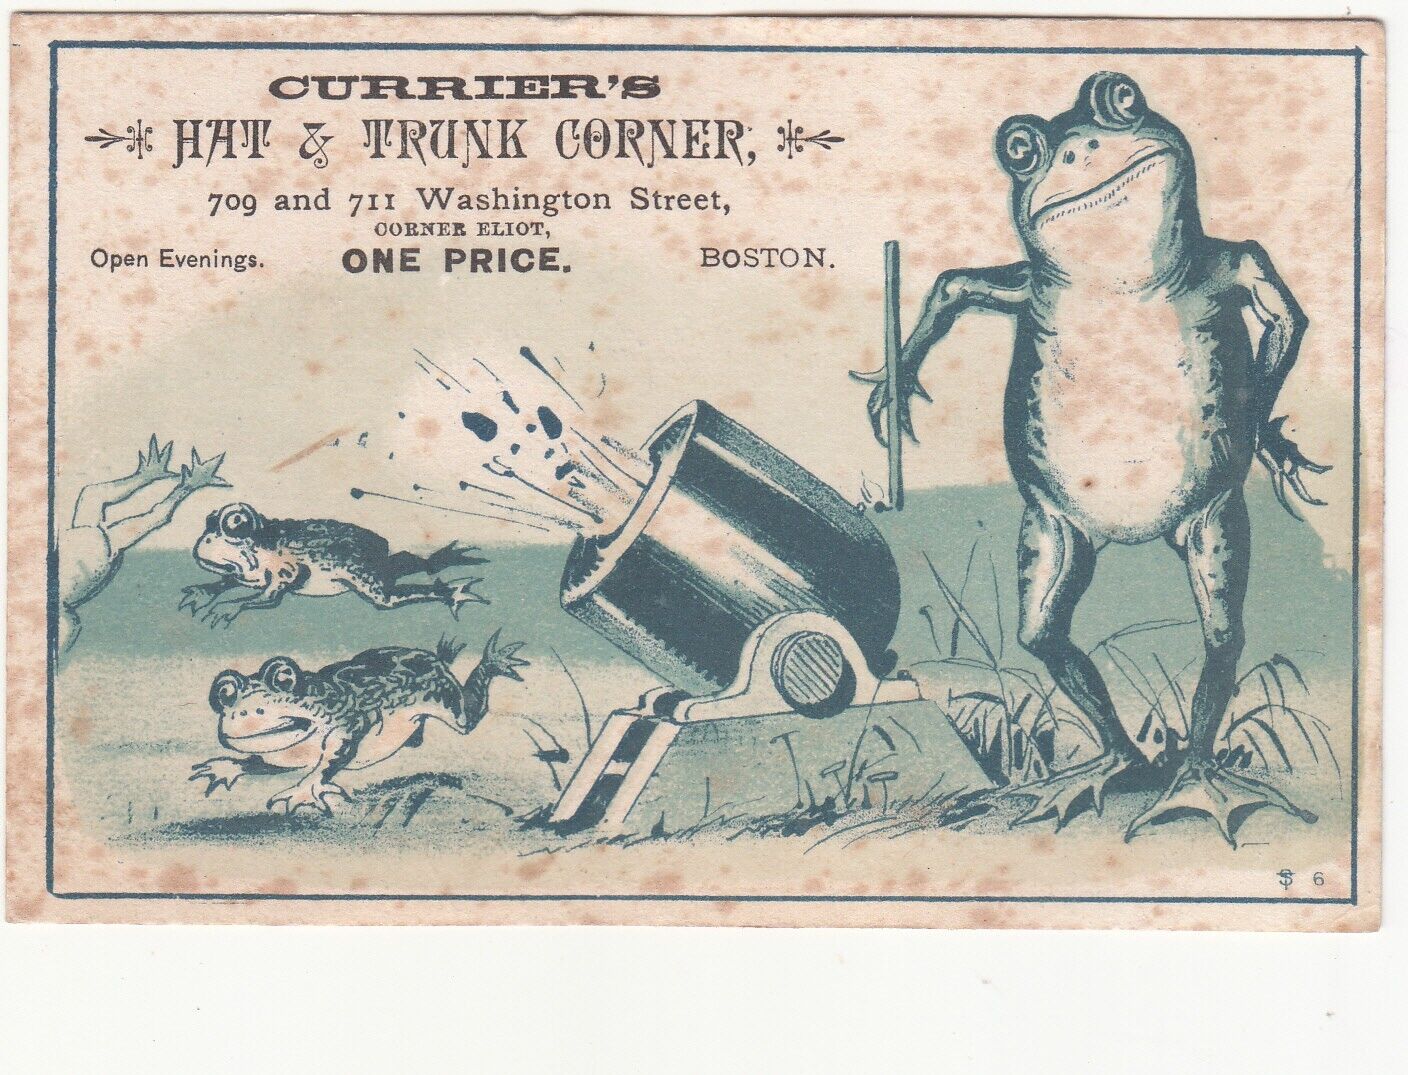 Currier\'s Hat & Trunk Corner Boston Frog Cannon Vict Card c1880s